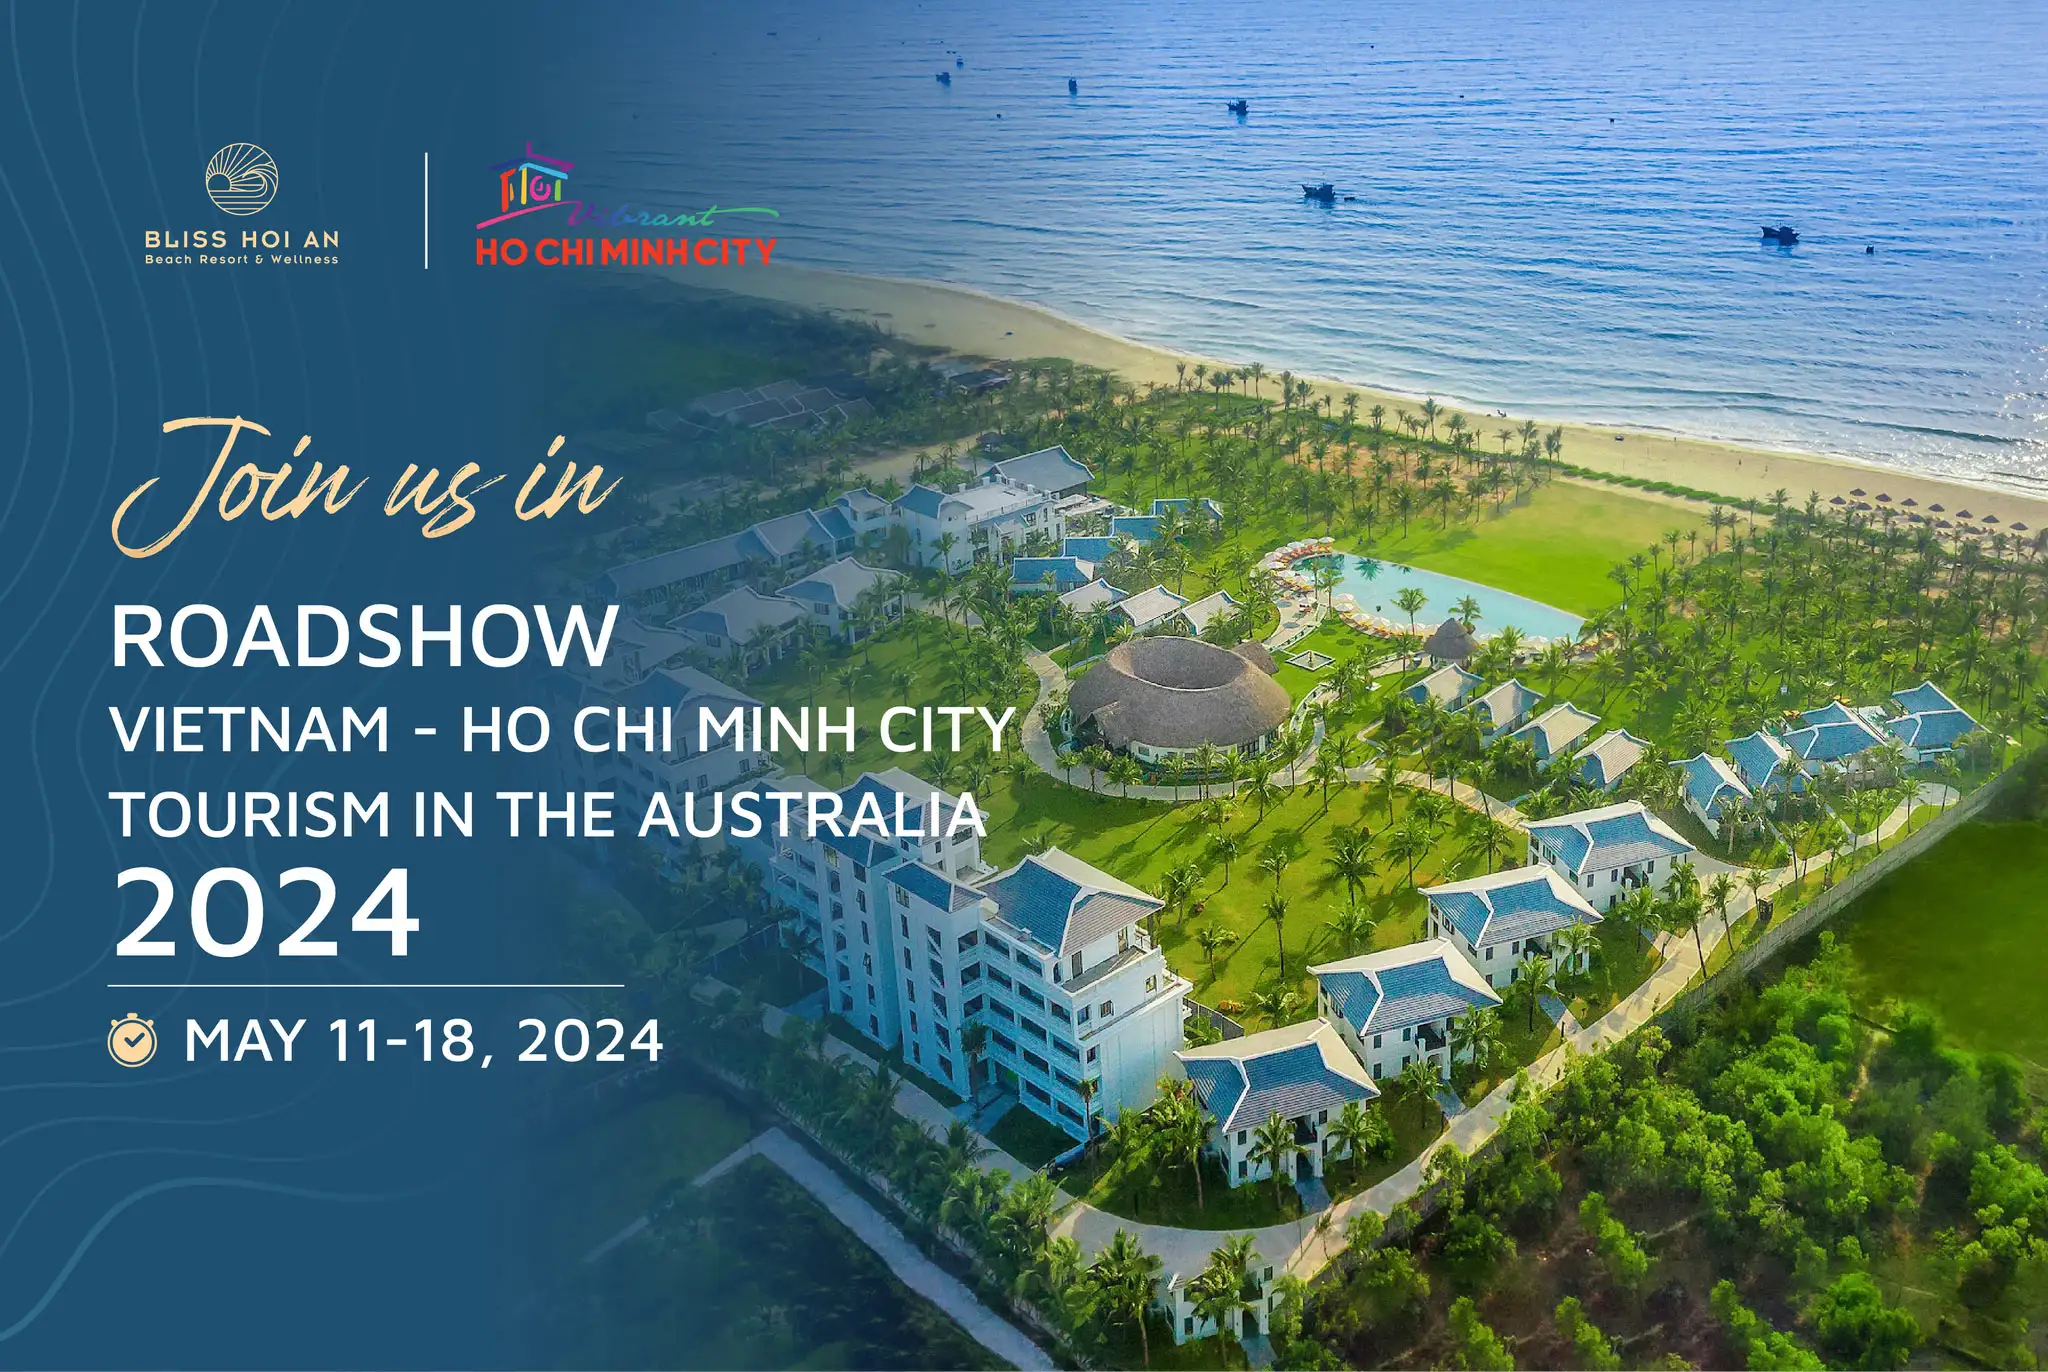 Bliss Hoi An Beach Resort & Wellness Will Participate In The Roadshow Vietnam - Ho Chi Minh City Tourism In Australia 2024